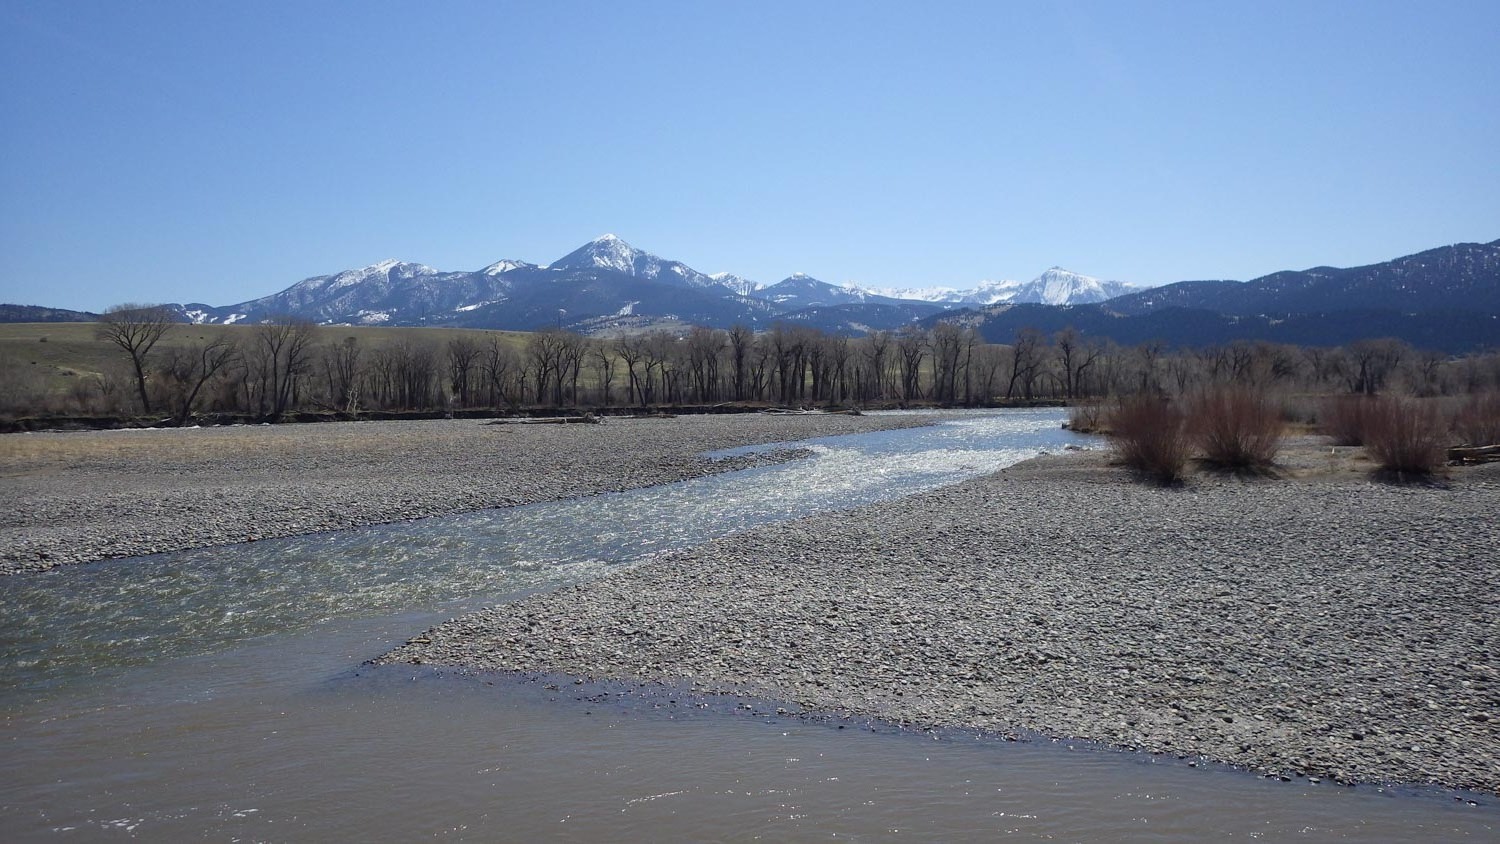 Yellowstone River flowing through rocky banks with mountains in the background